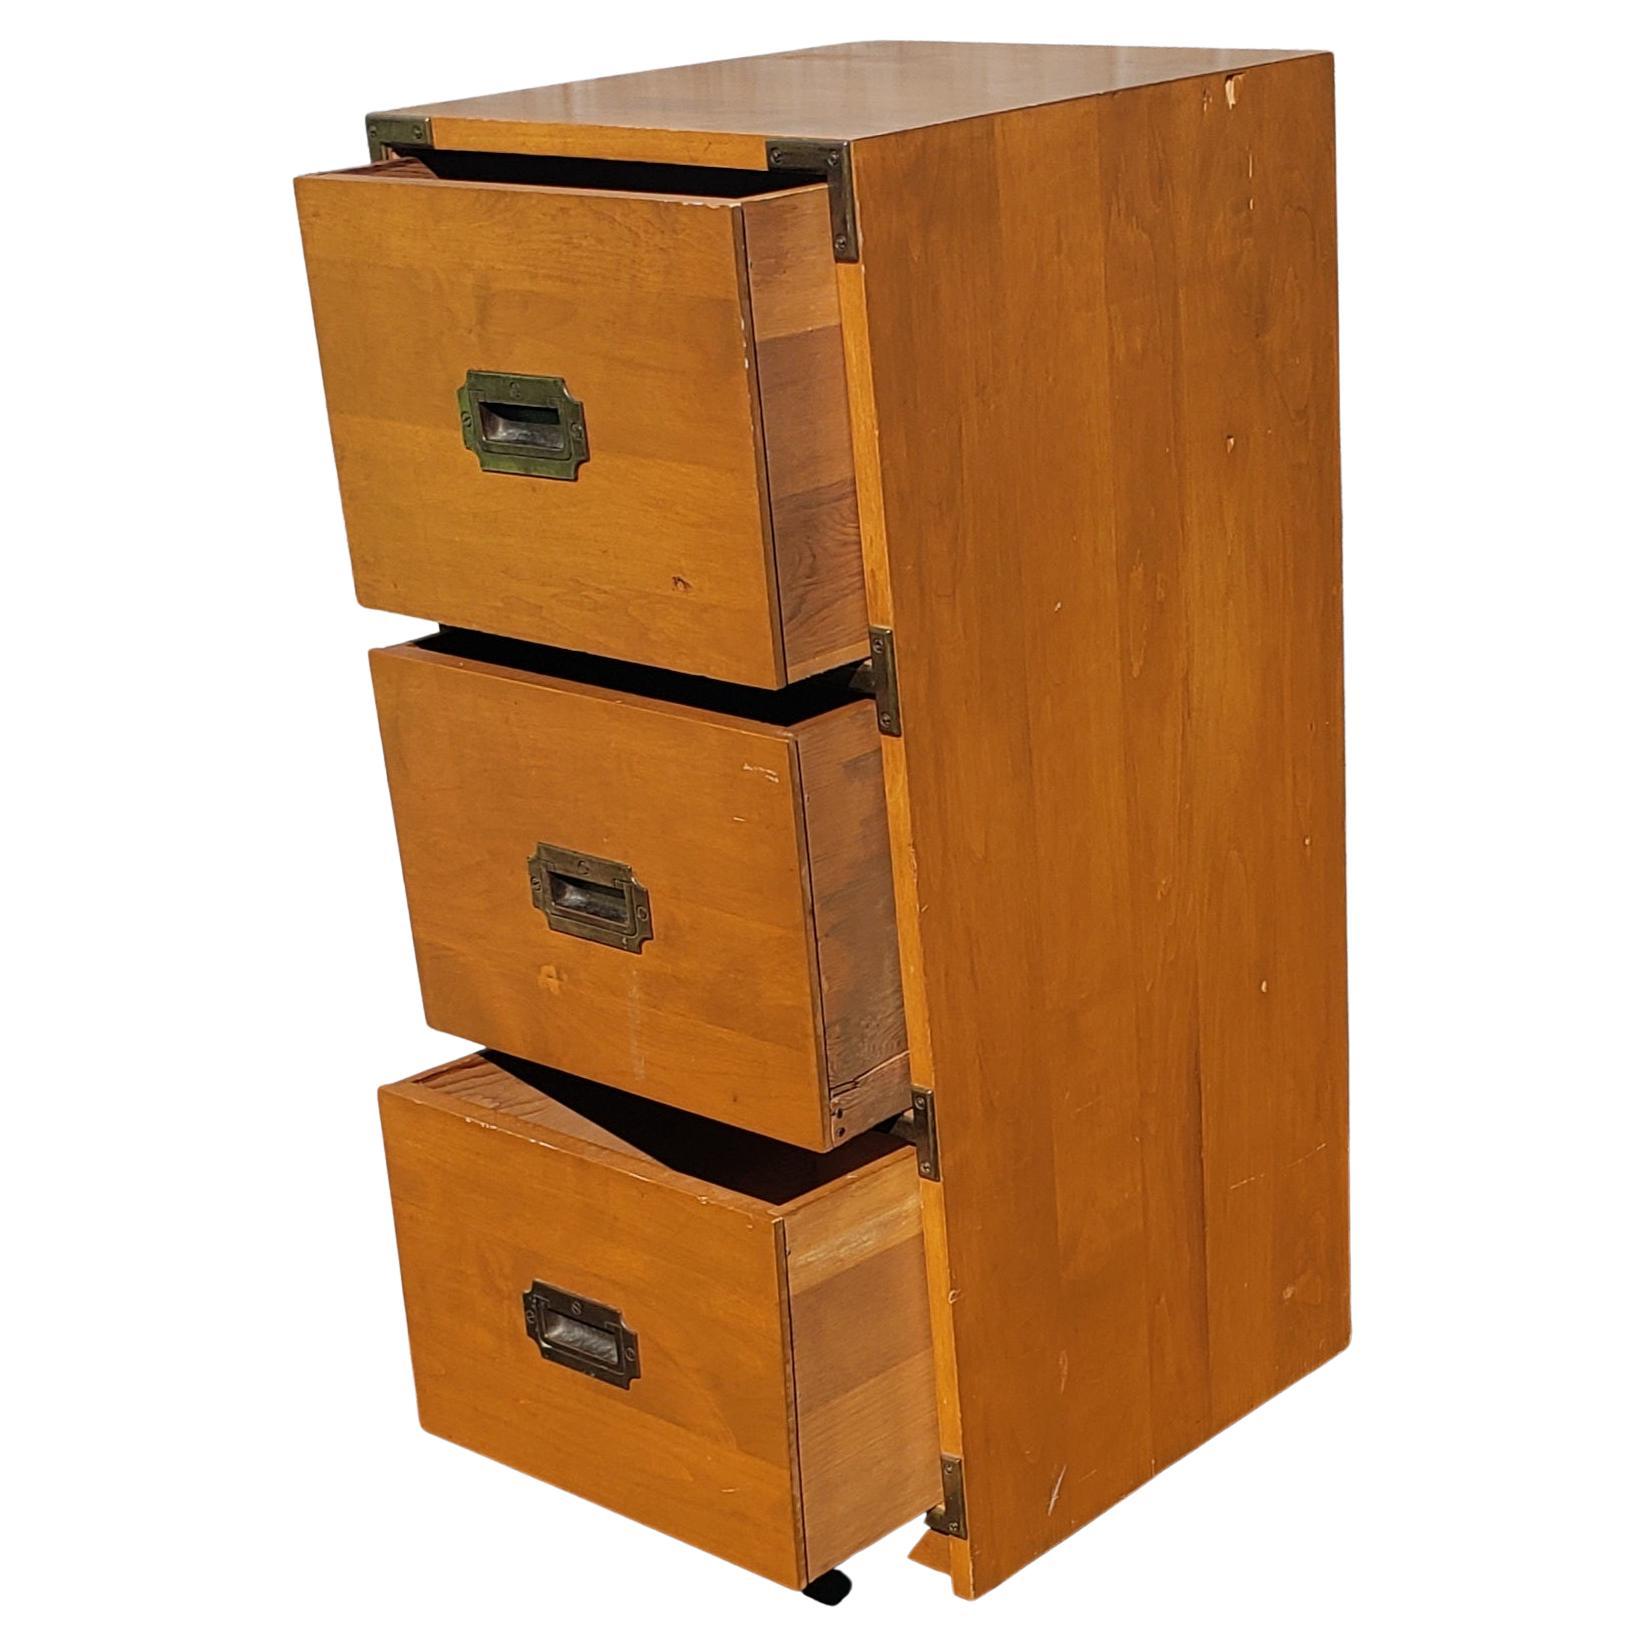 BiMi Deluxe Ready Built 3 Drawer Filing Cabinet in Maple 